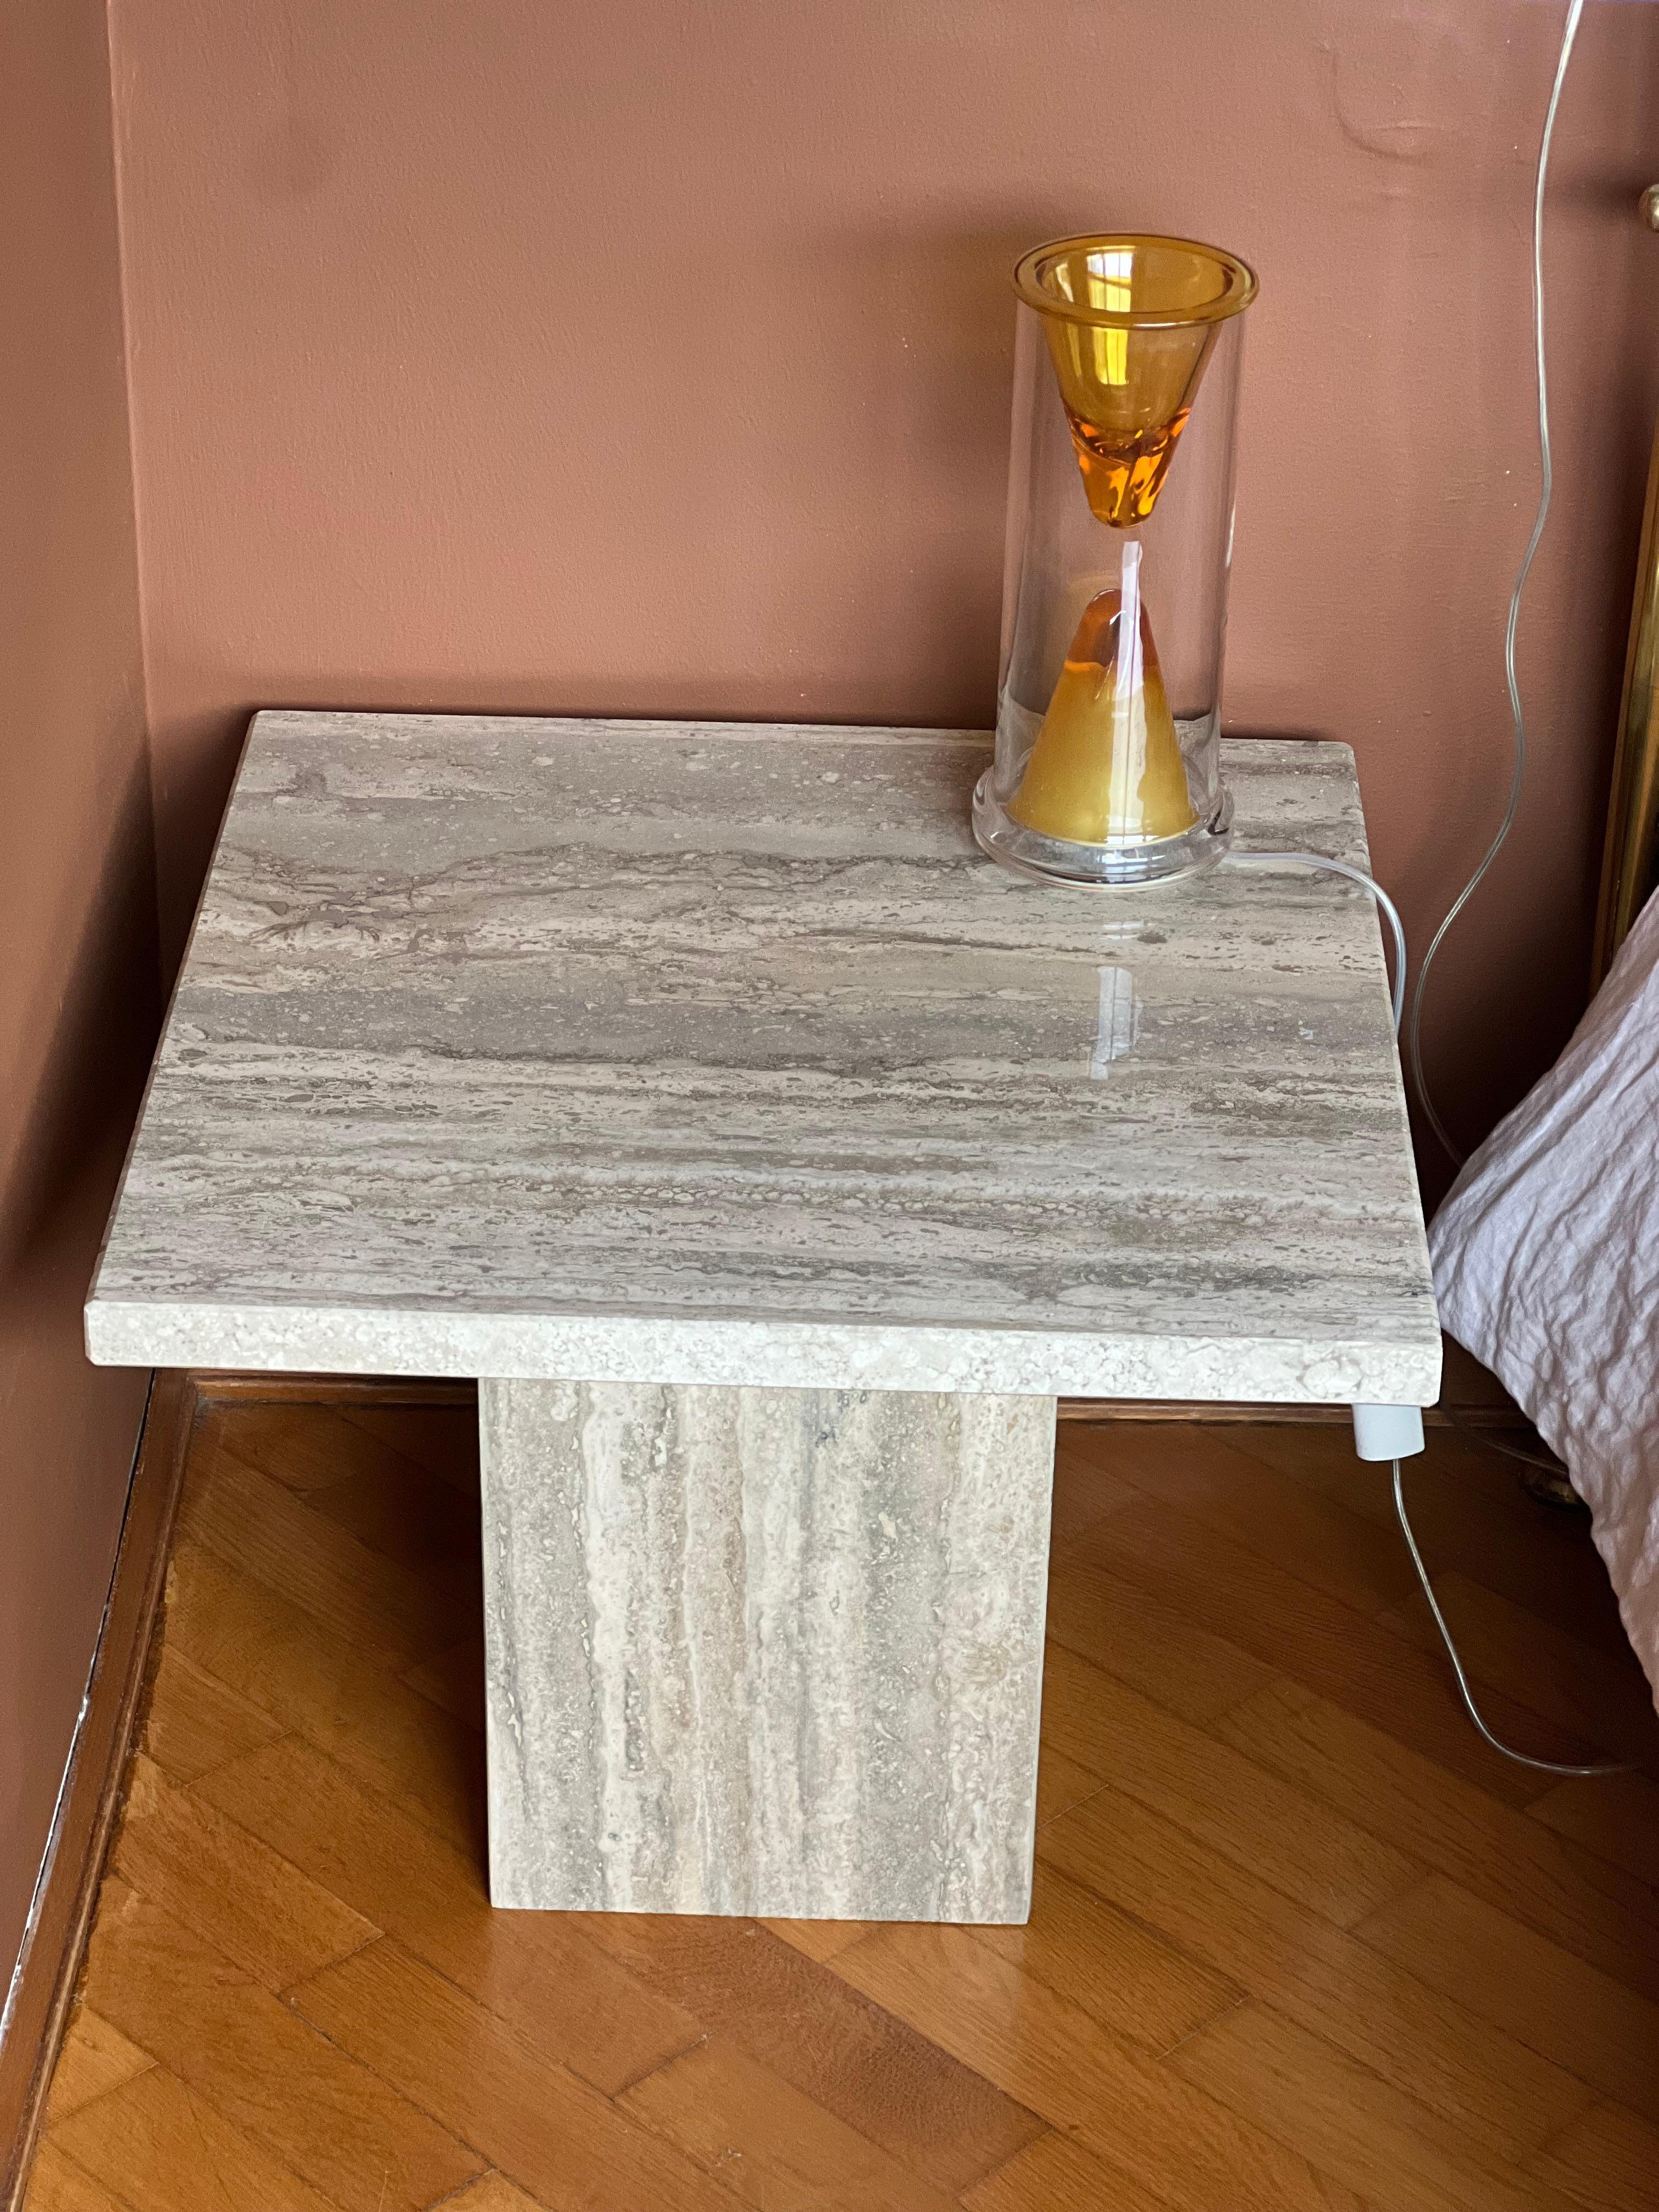 Set of Two Mid-Century Modern Side Tables in Travertine, Urban Wabi Style, Pair For Sale 5